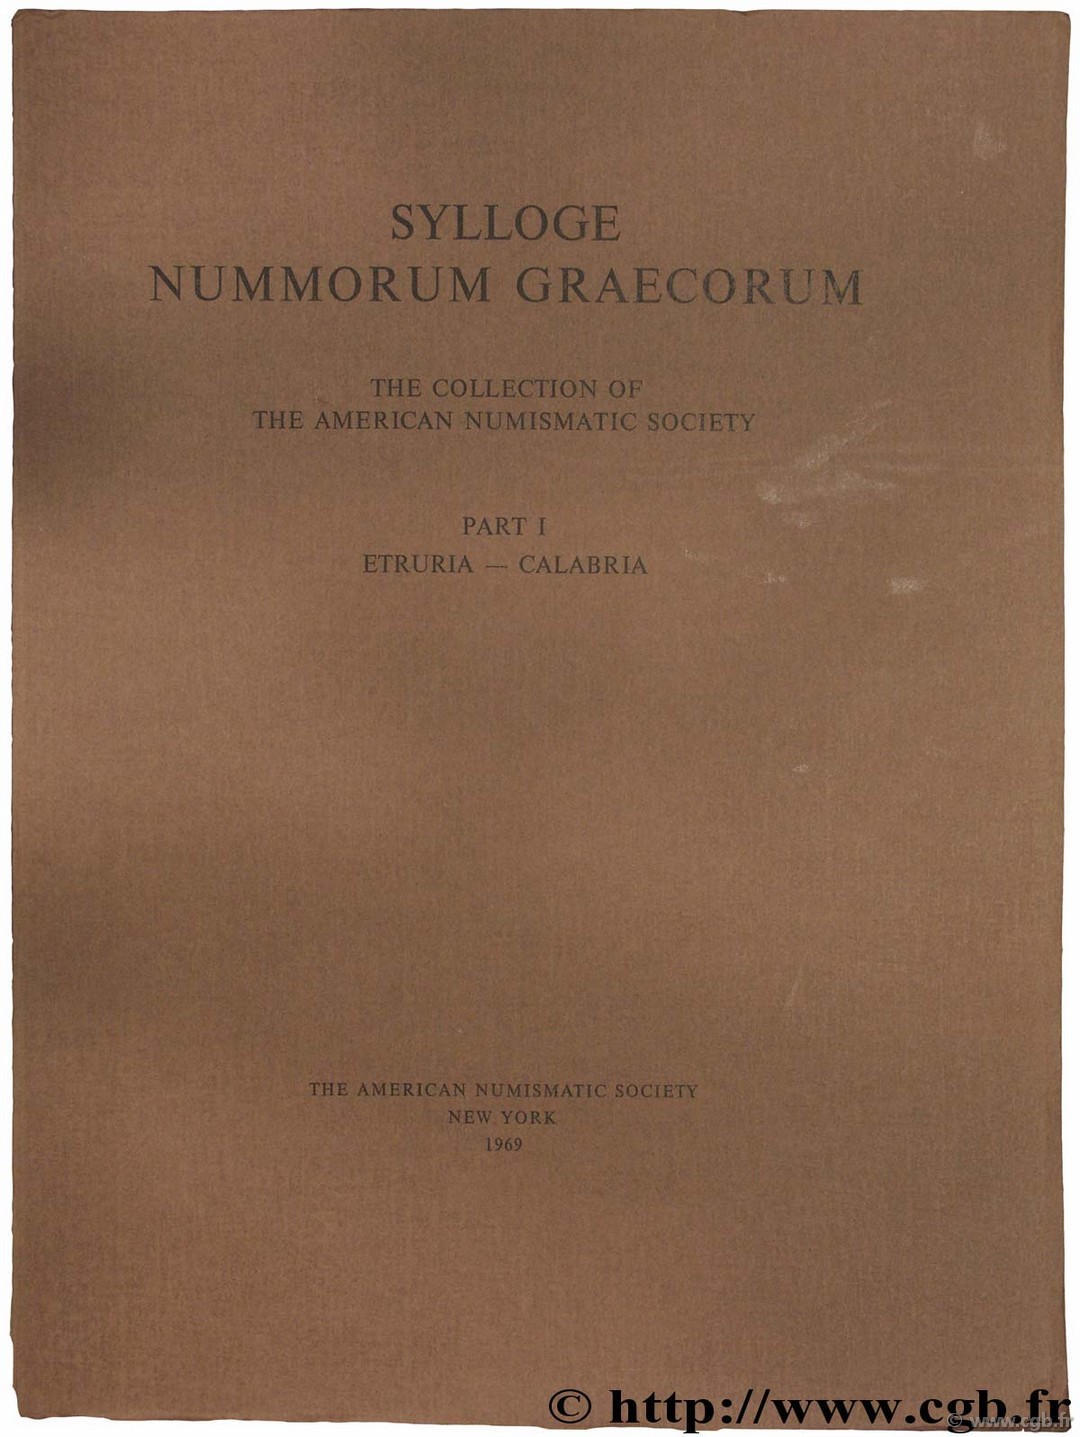 Sylloge Nummorum Graecorum (S.N.G.), The collection of the American Numismatic Society, part I, Etruria-Calabria 